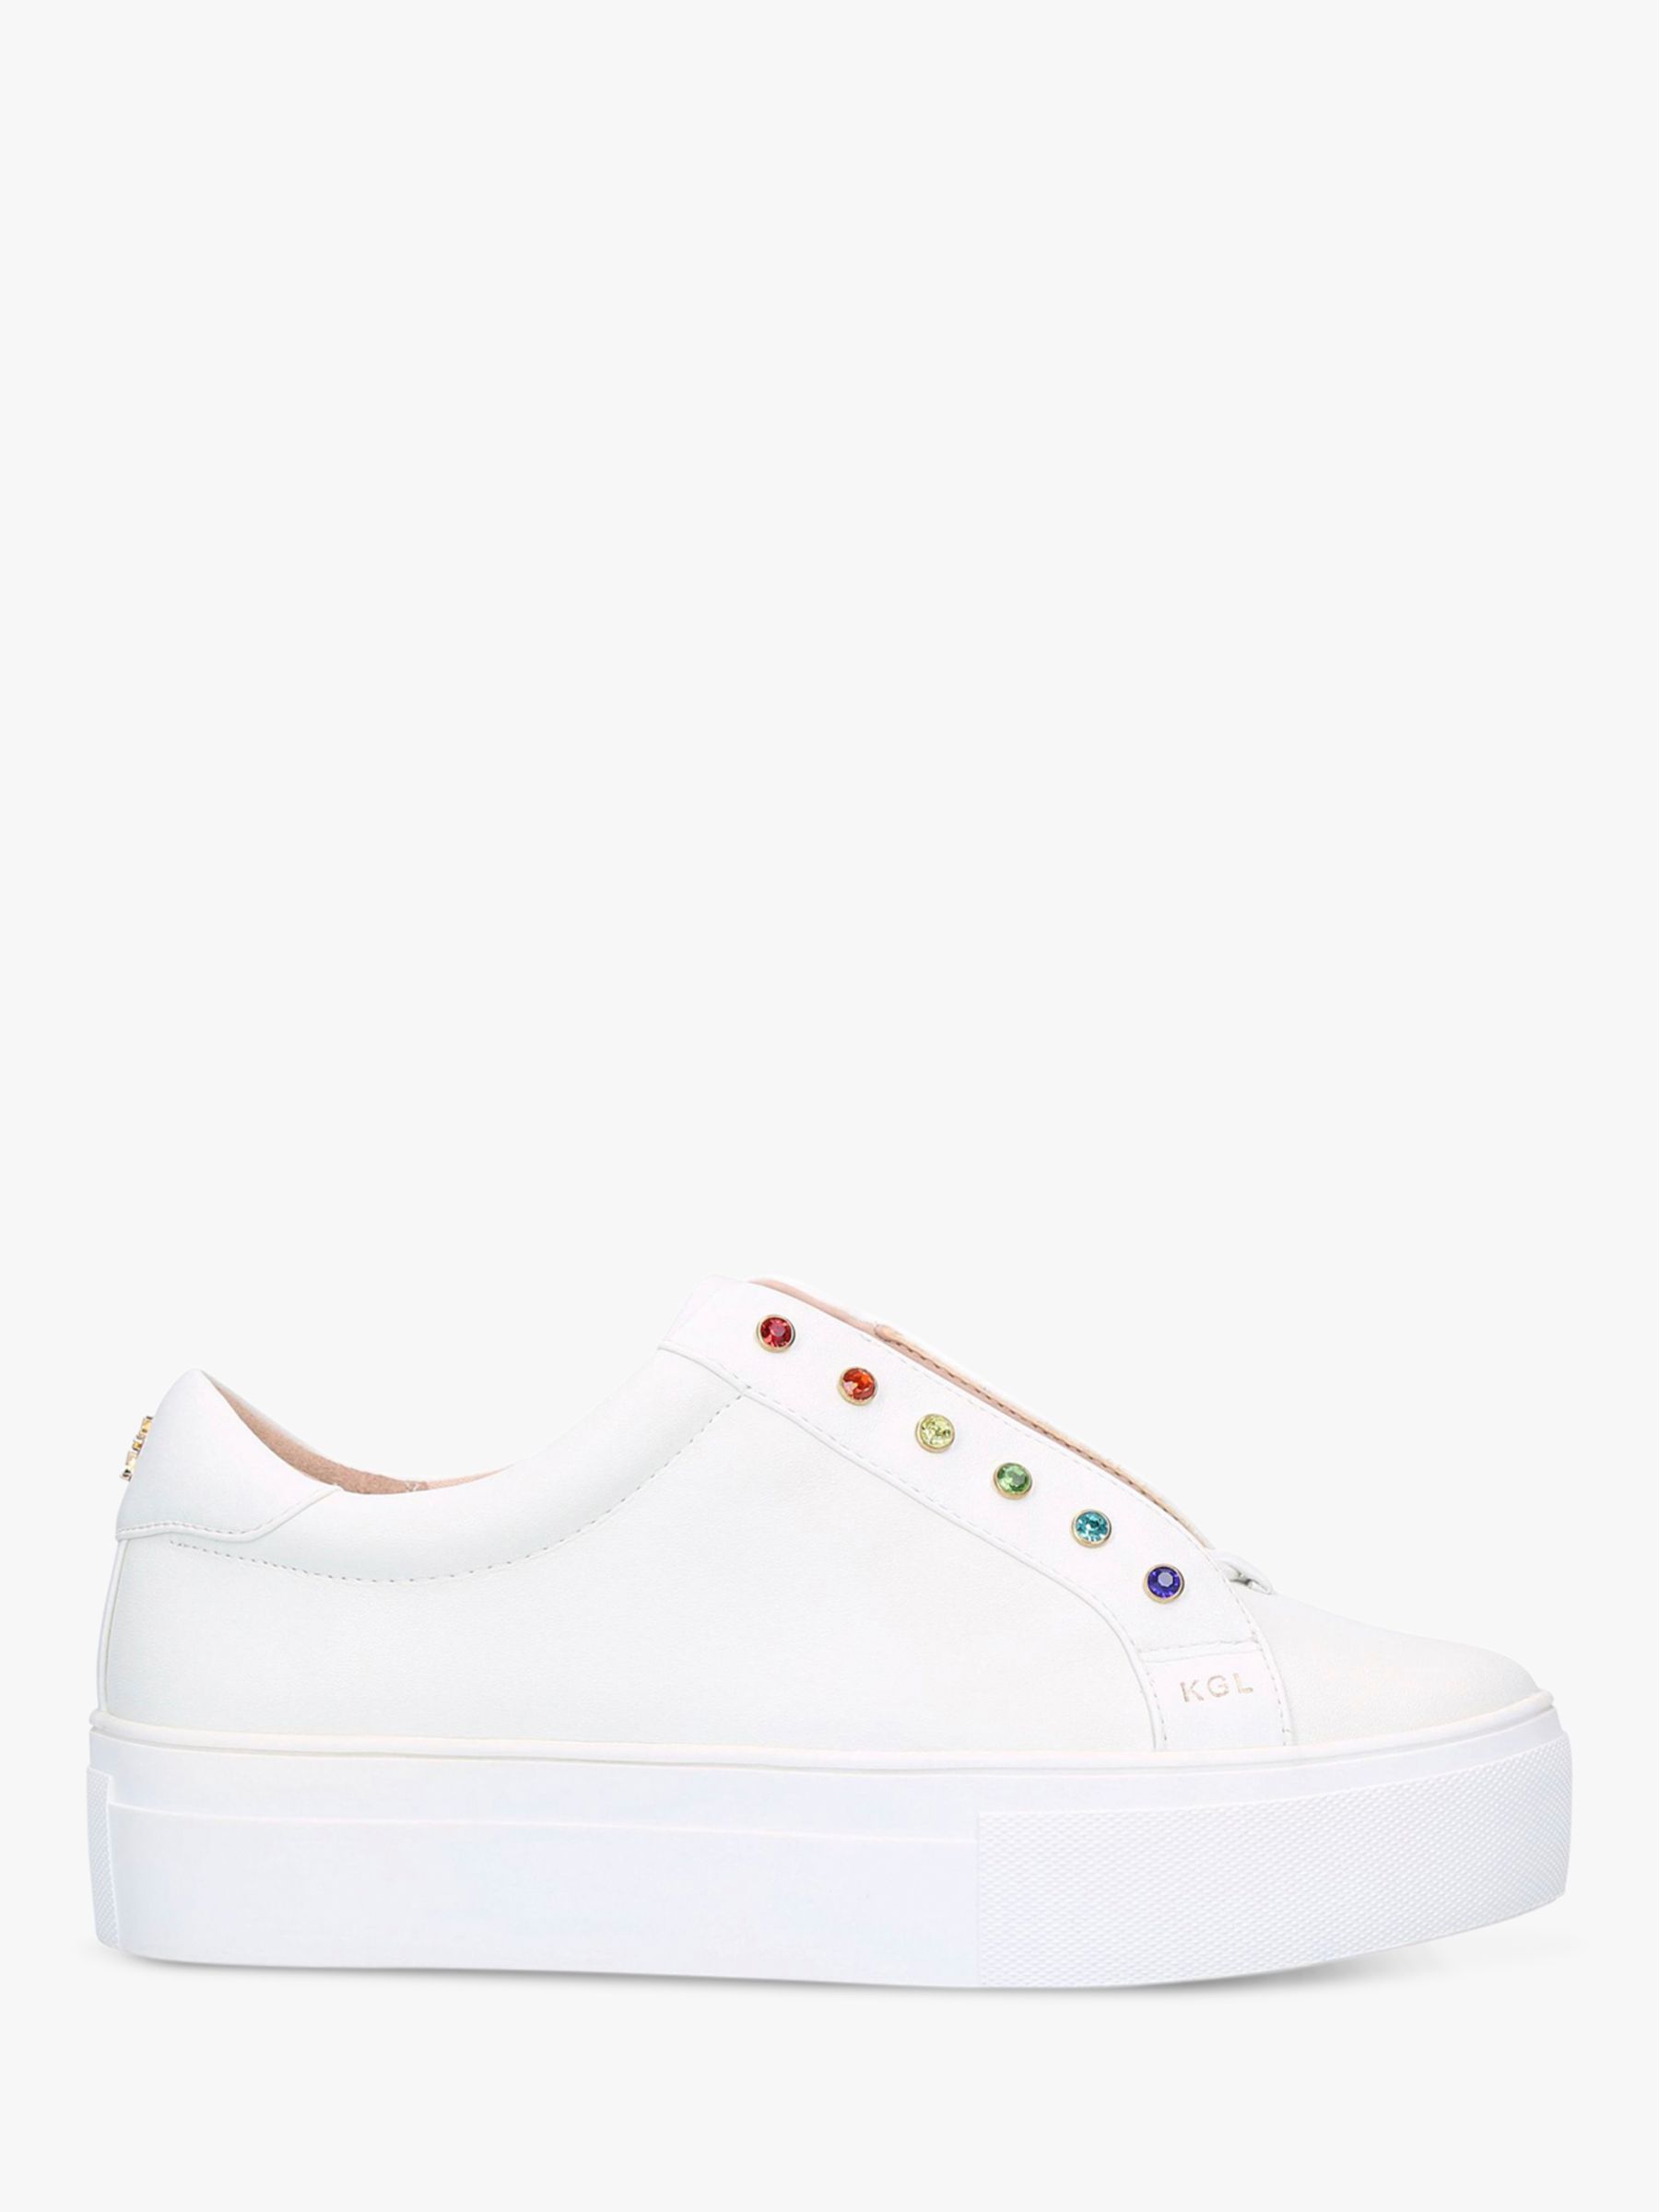 Kurt Geiger London Liviah Studded Low Top Trainers, White Rainbow at ...